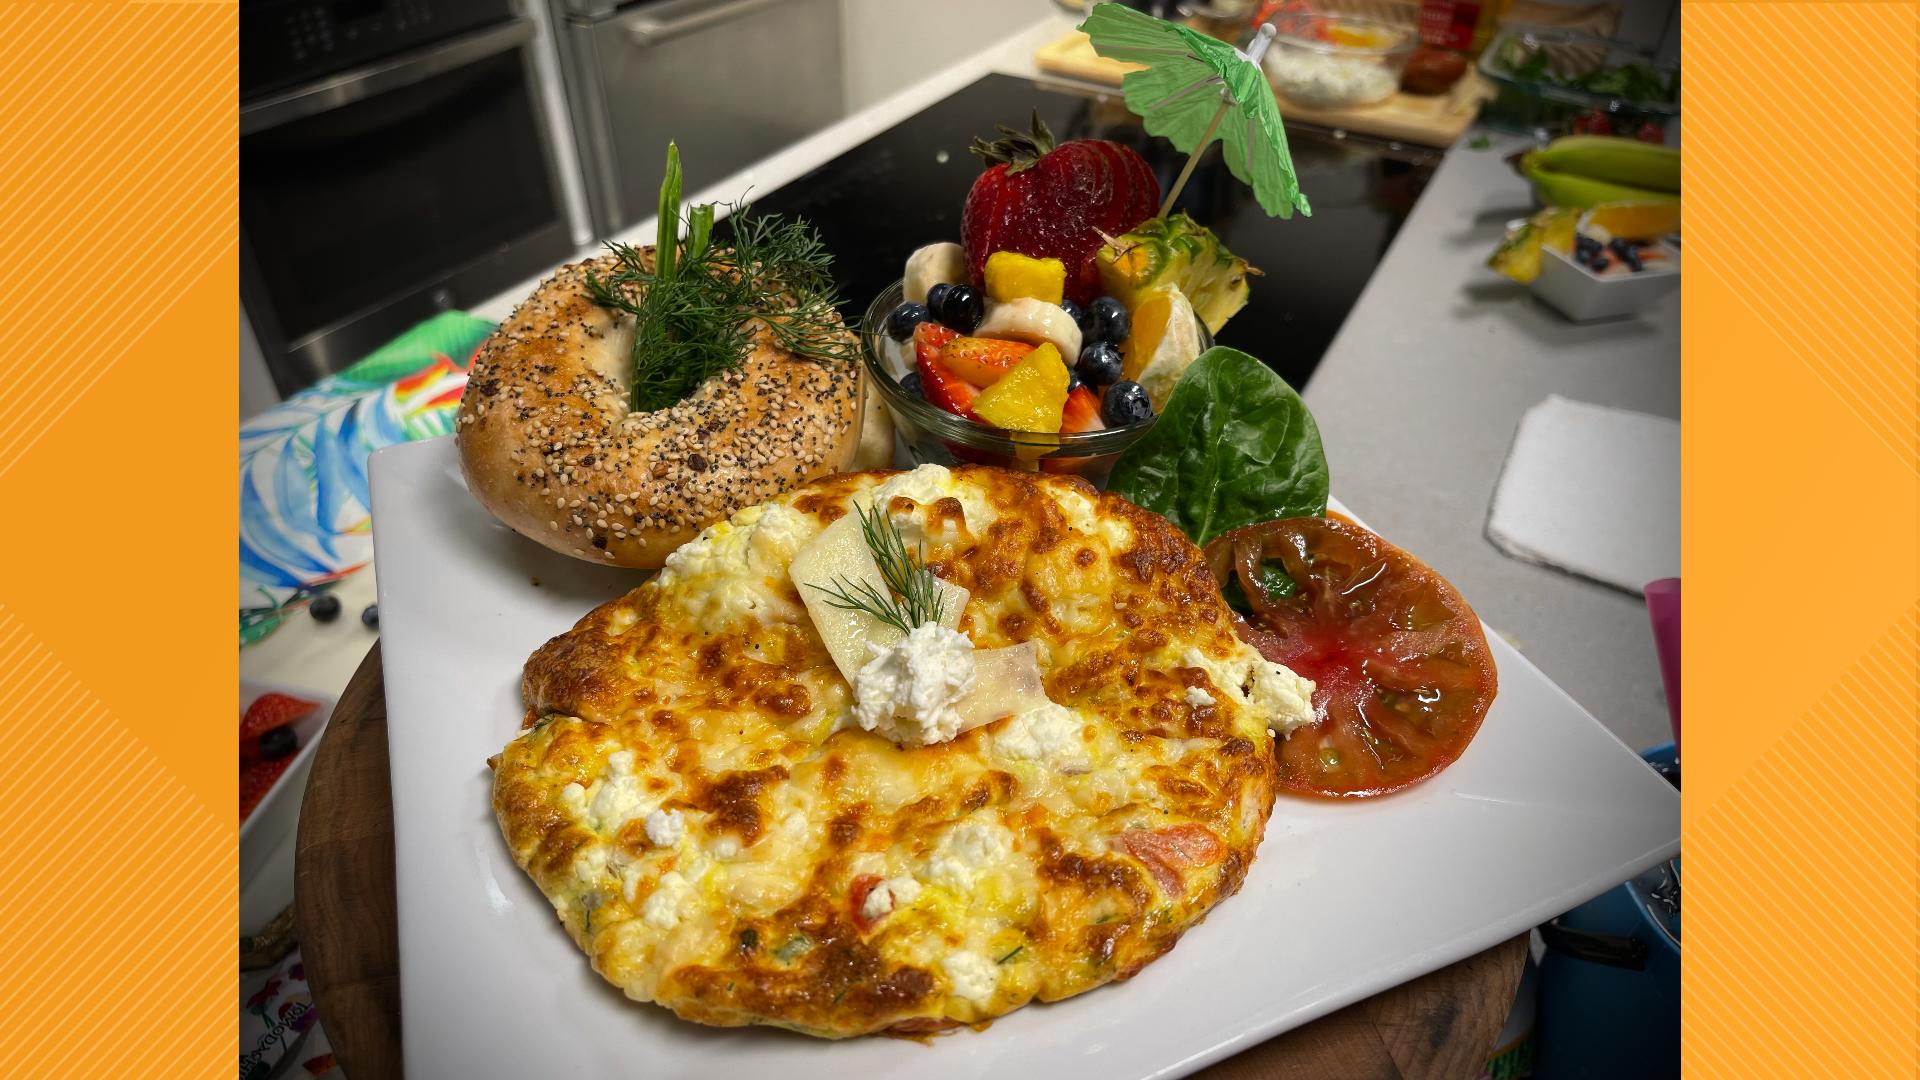 Olivia's Greek Frittata is best served with a toasty bagel topped with cream cheese, lox and capers.